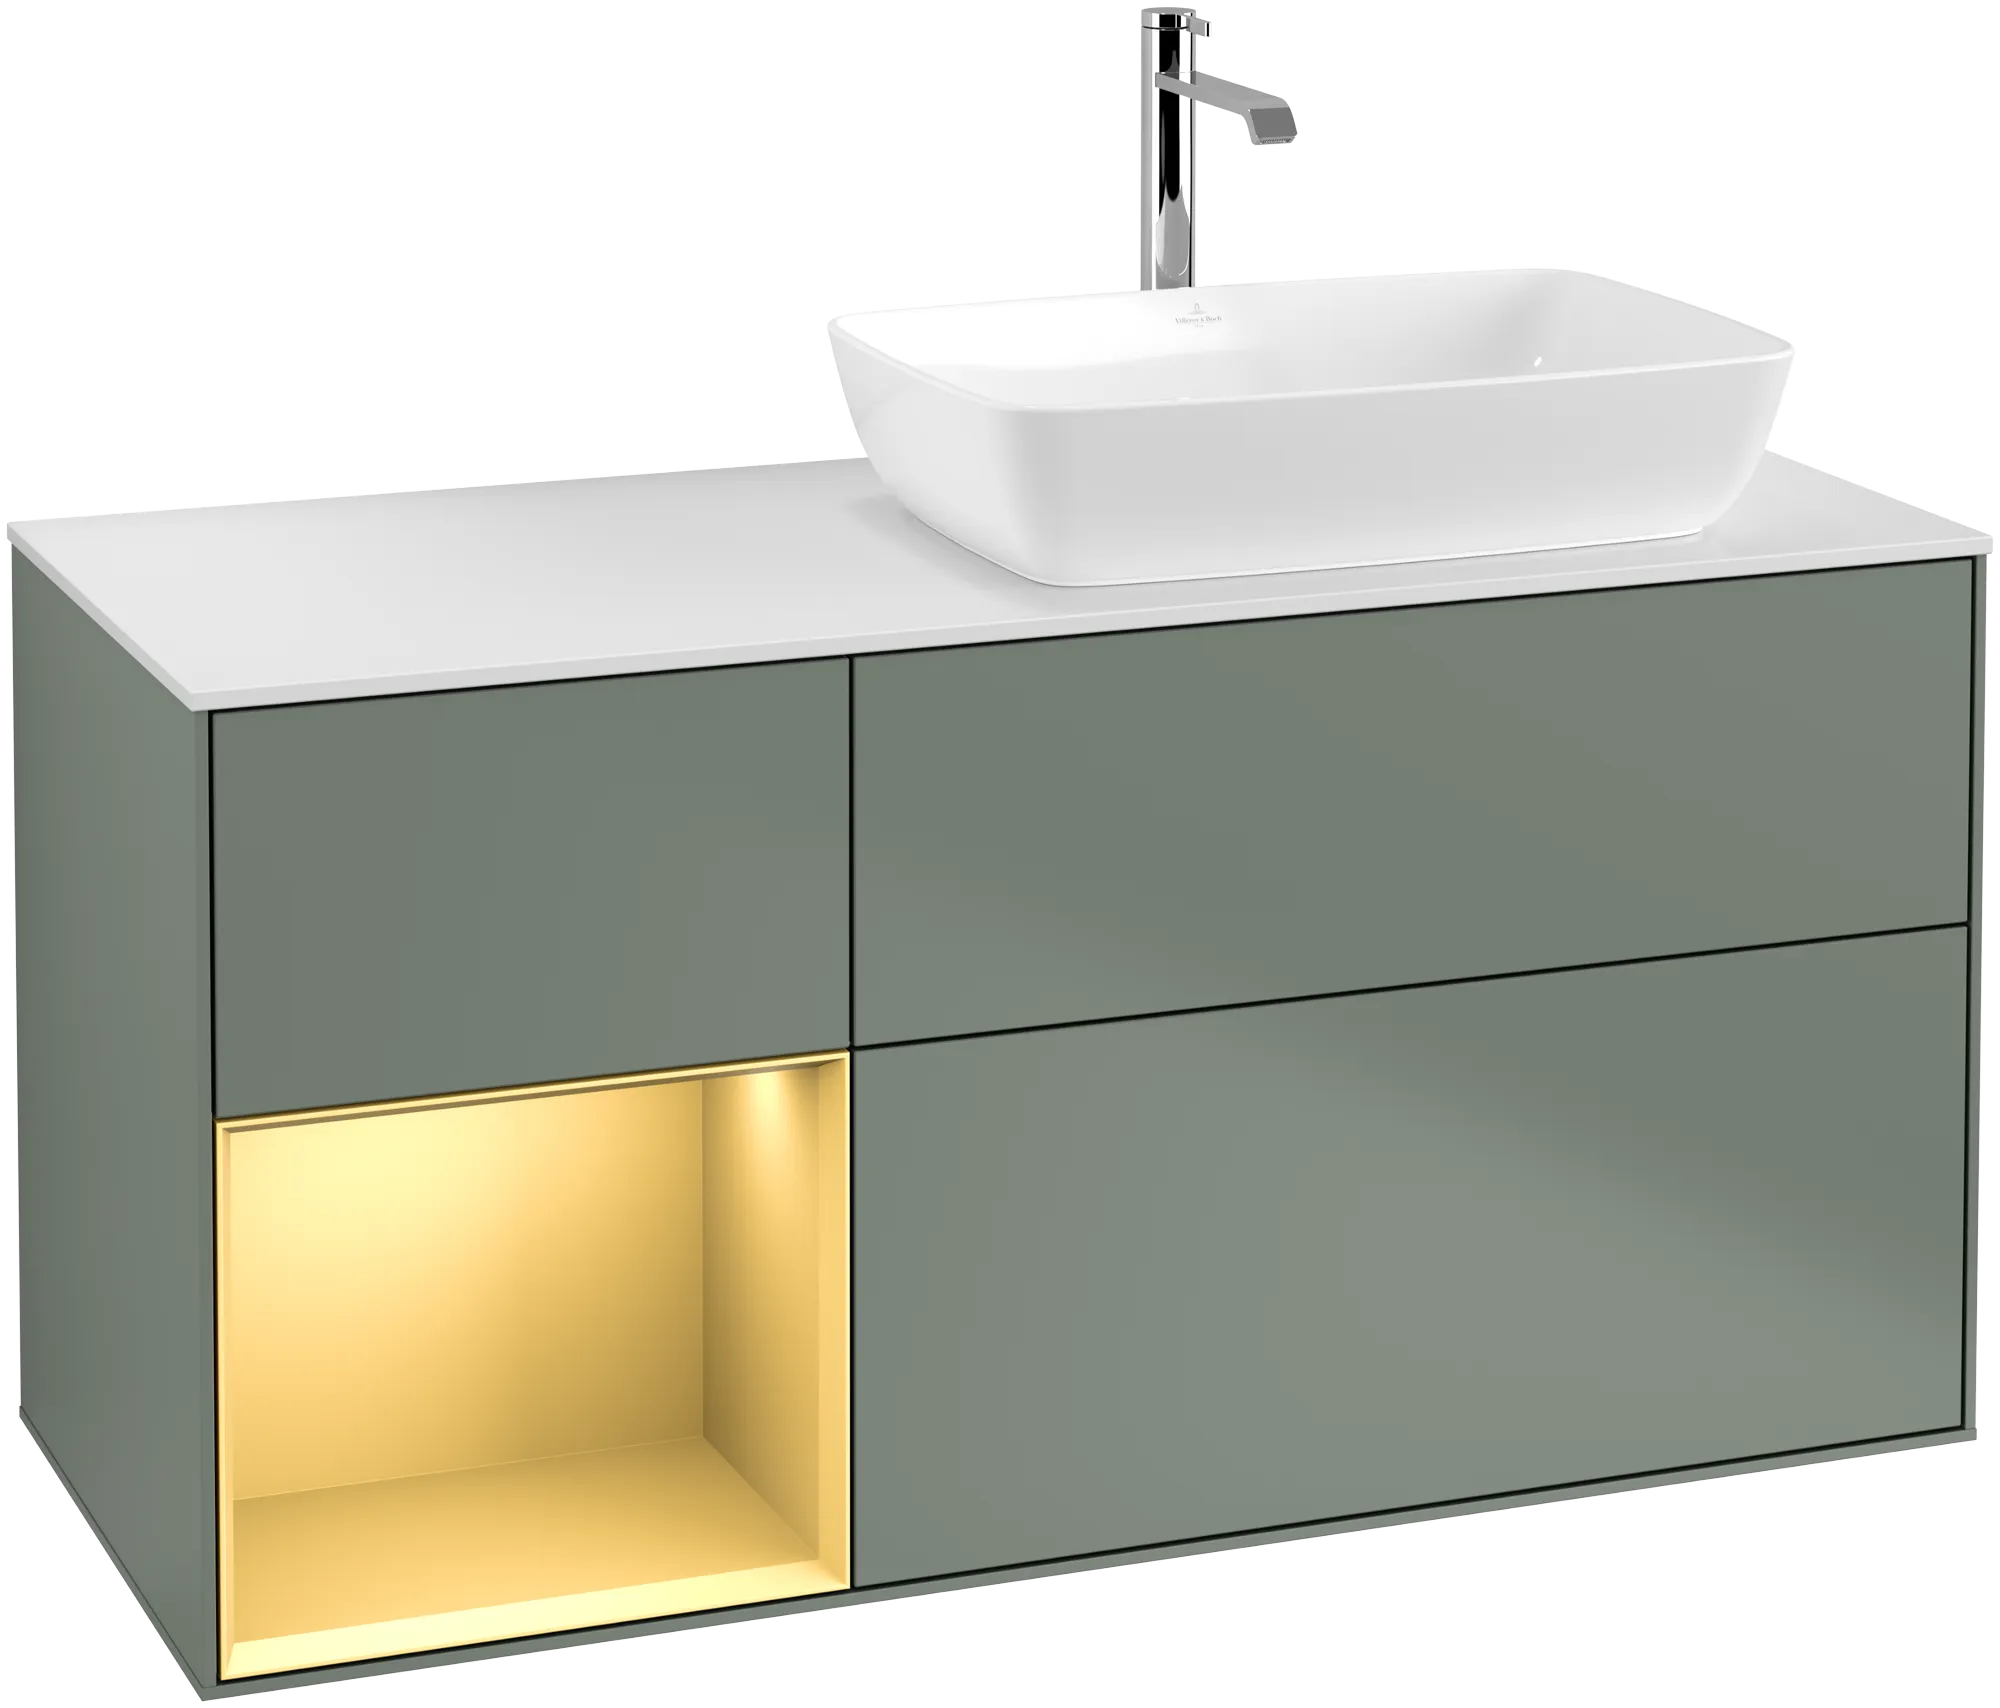 Obrázek VILLEROY BOCH Finion Vanity unit, with lighting, 3 pull-out compartments, 1200 x 603 x 501 mm, Olive Matt Lacquer / Gold Matt Lacquer / Glass White Matt #G801HFGM